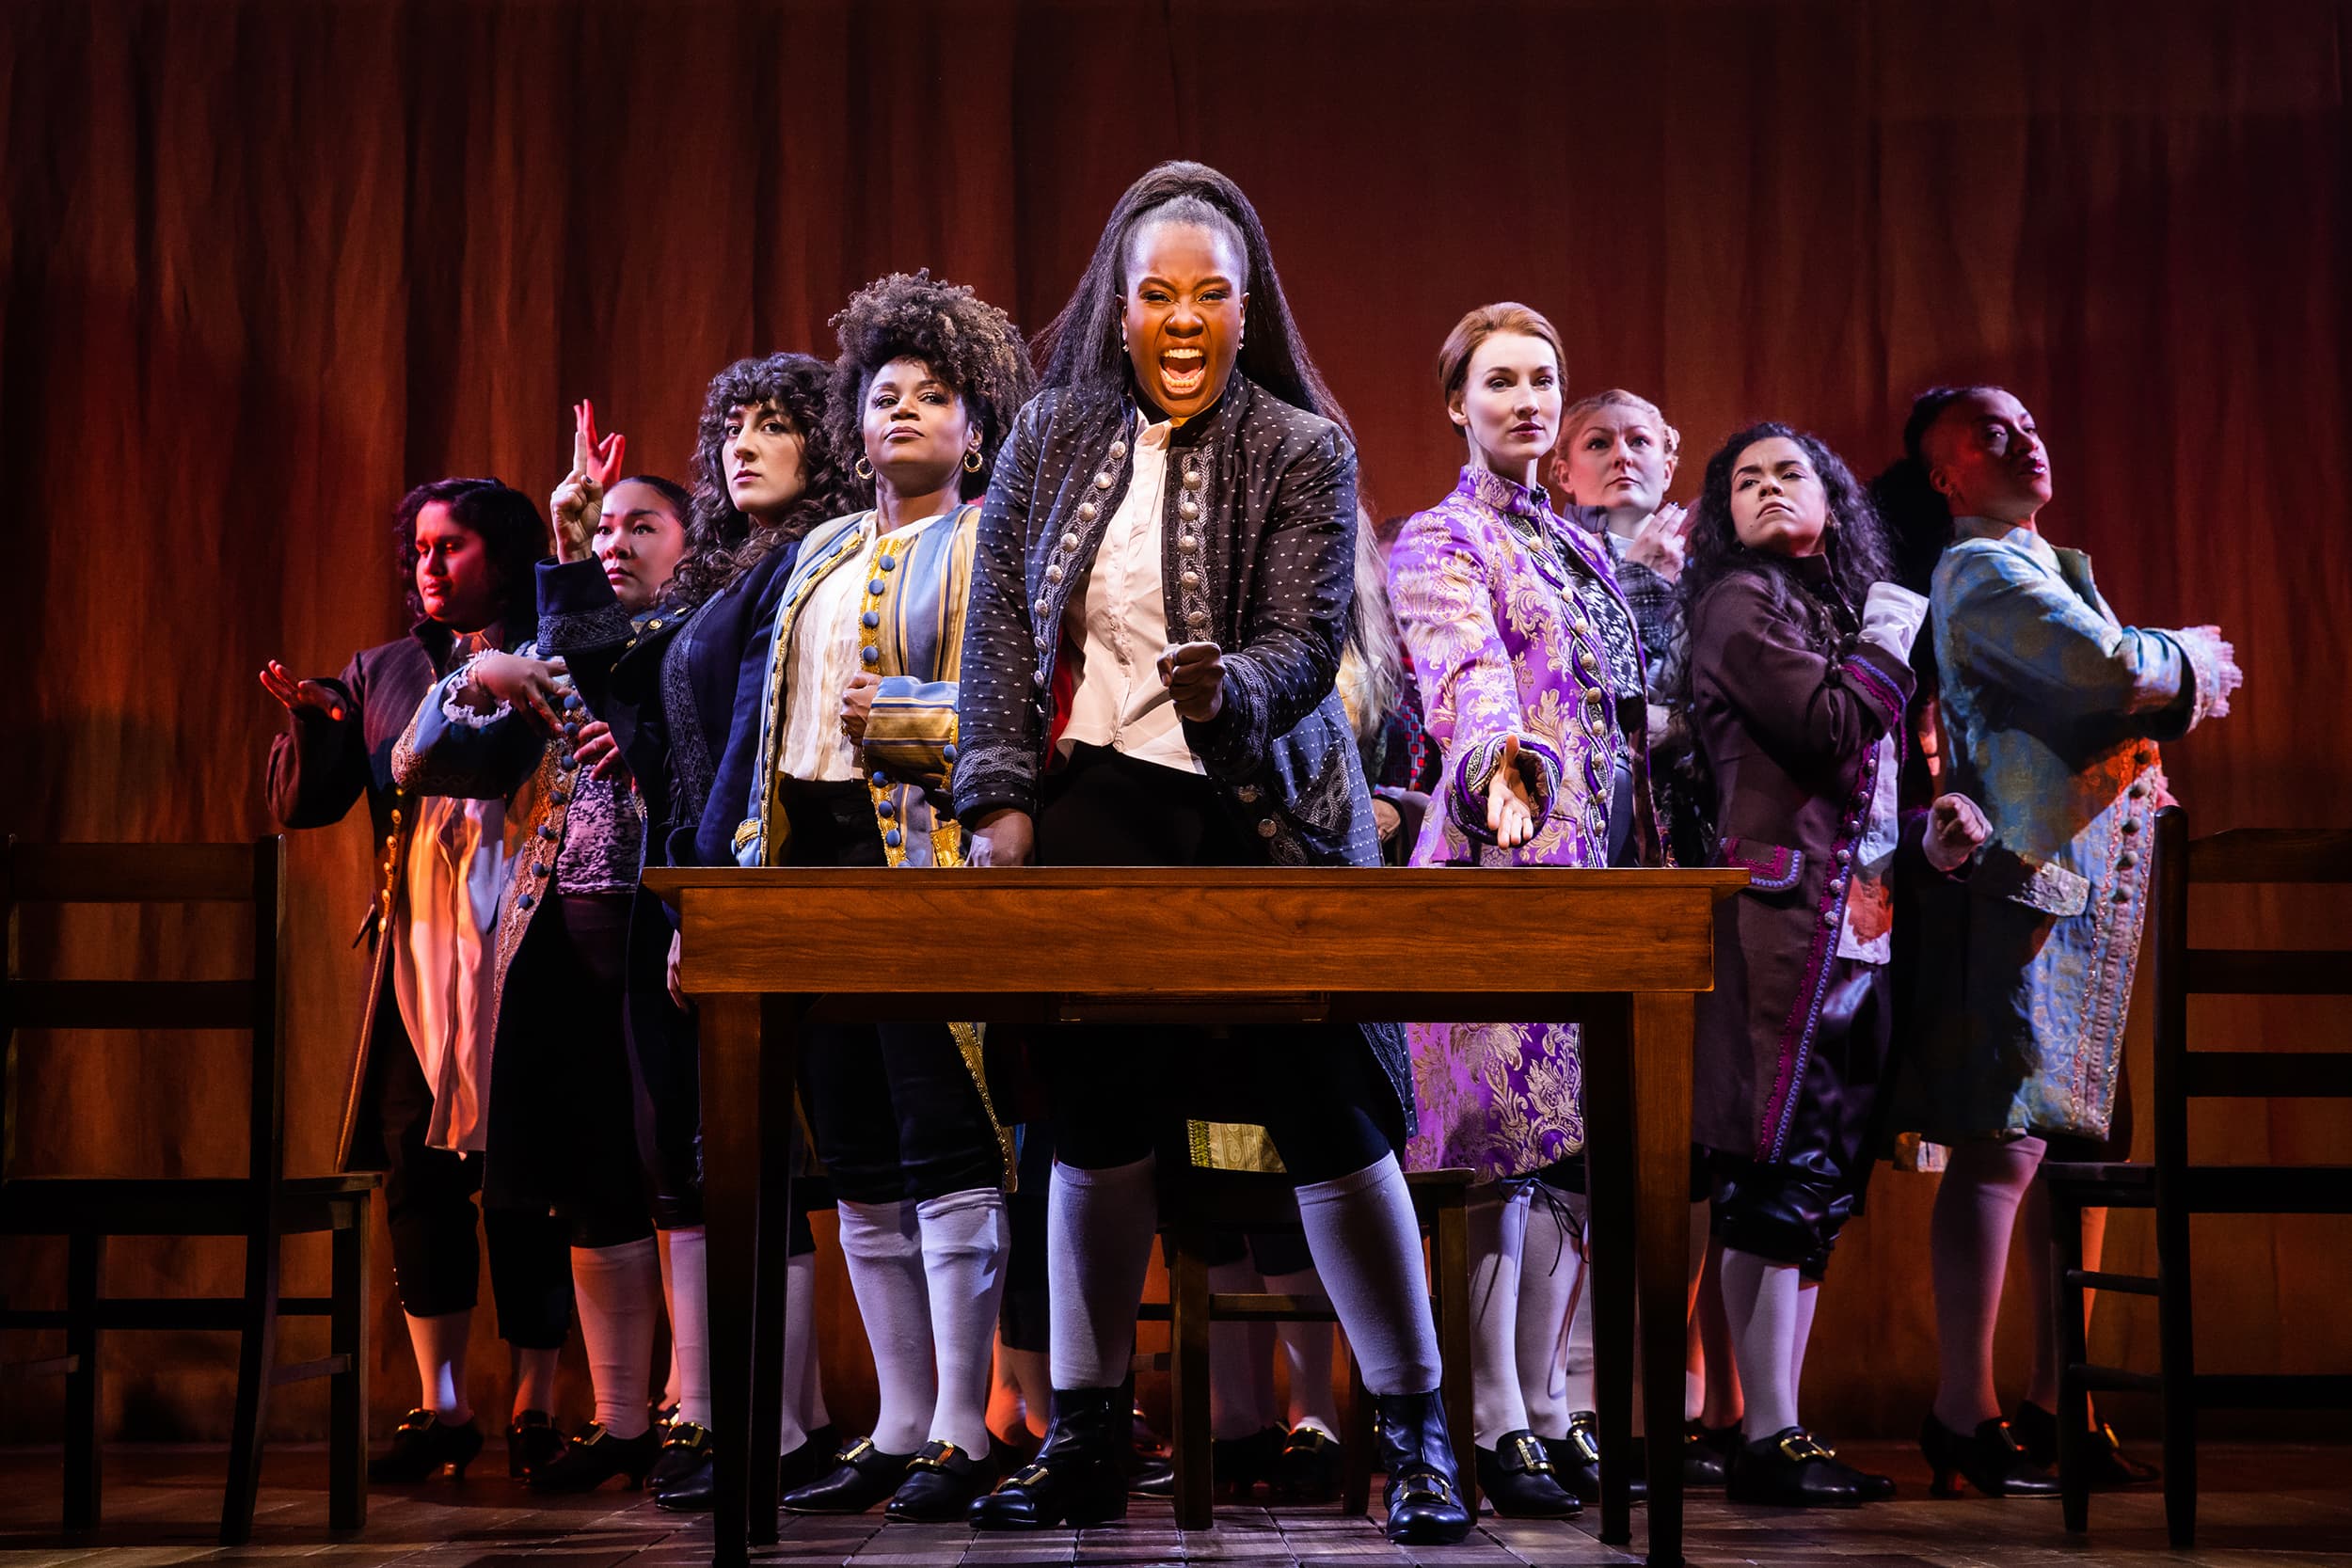 Left to right: Sushma Saha, Sara Porkalob, Mehry Eslaminia, Gisela Adisa, Crystal Lucas-Perry, Elizabeth A. Davis, Becca Ayers, Brooke Simpson and Oneika Phillips in the American Repertory Theater's production of &quot;1776.&quot; (Courtesy Evan Zimmerman for Murphy Made)